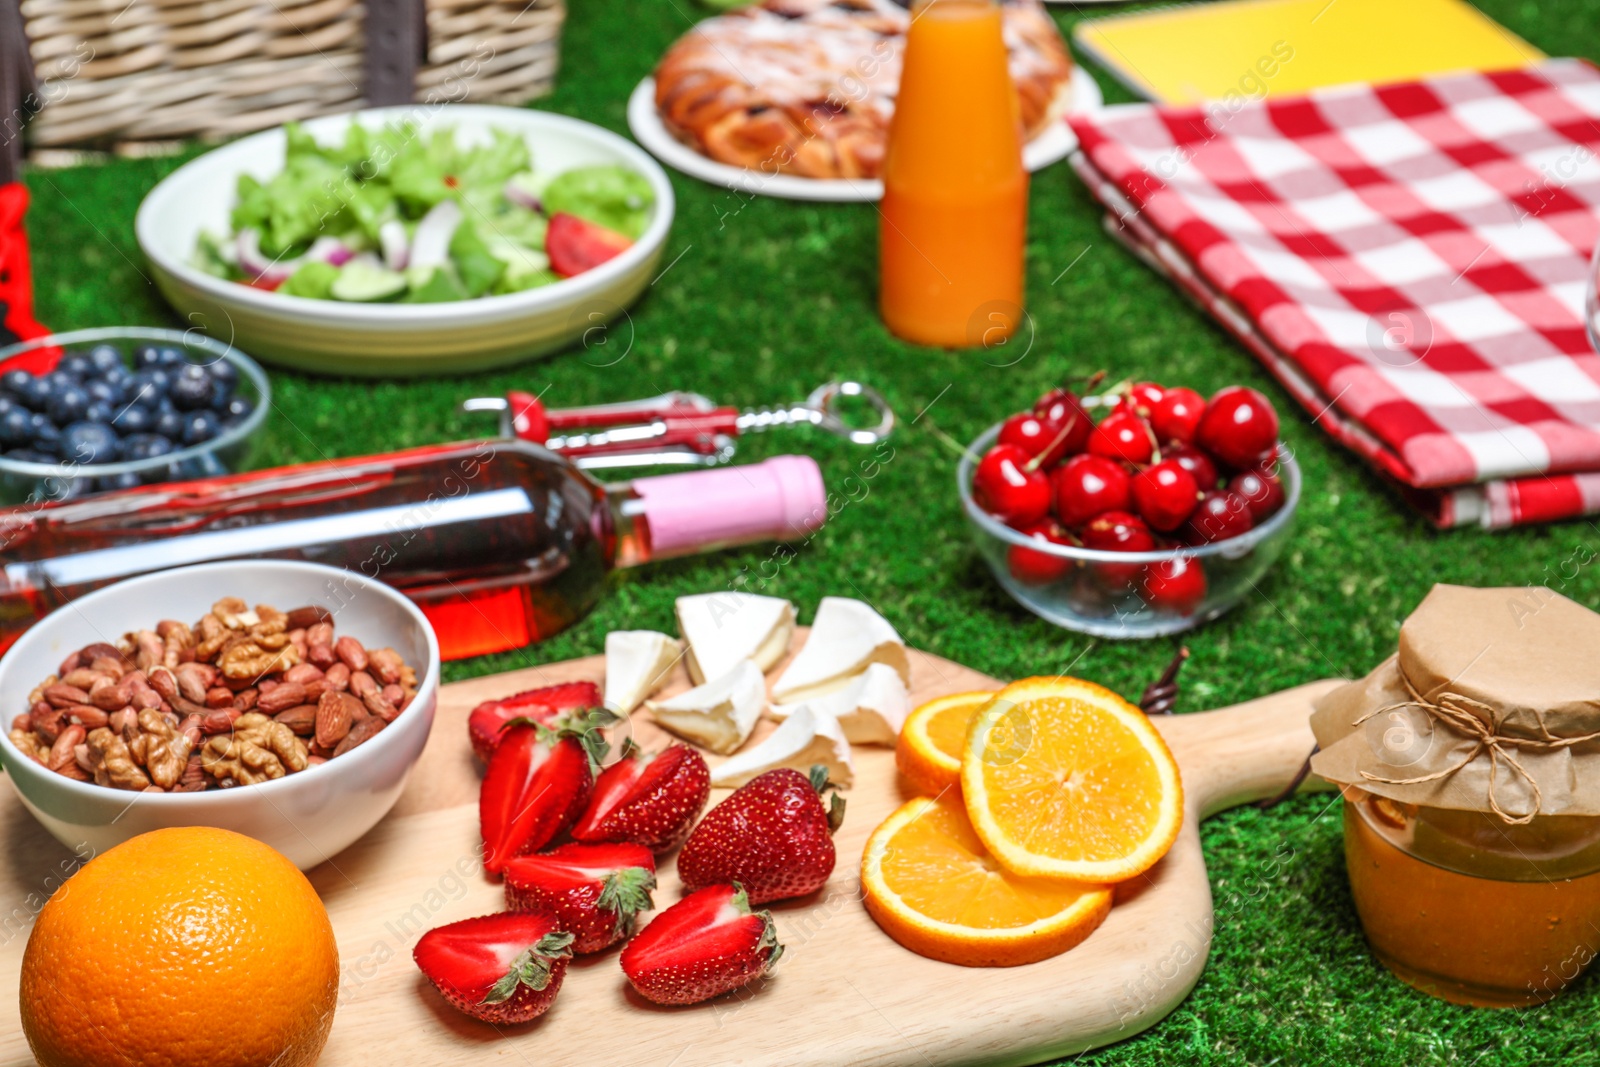 Photo of Many different products on green grass. Summer picnic